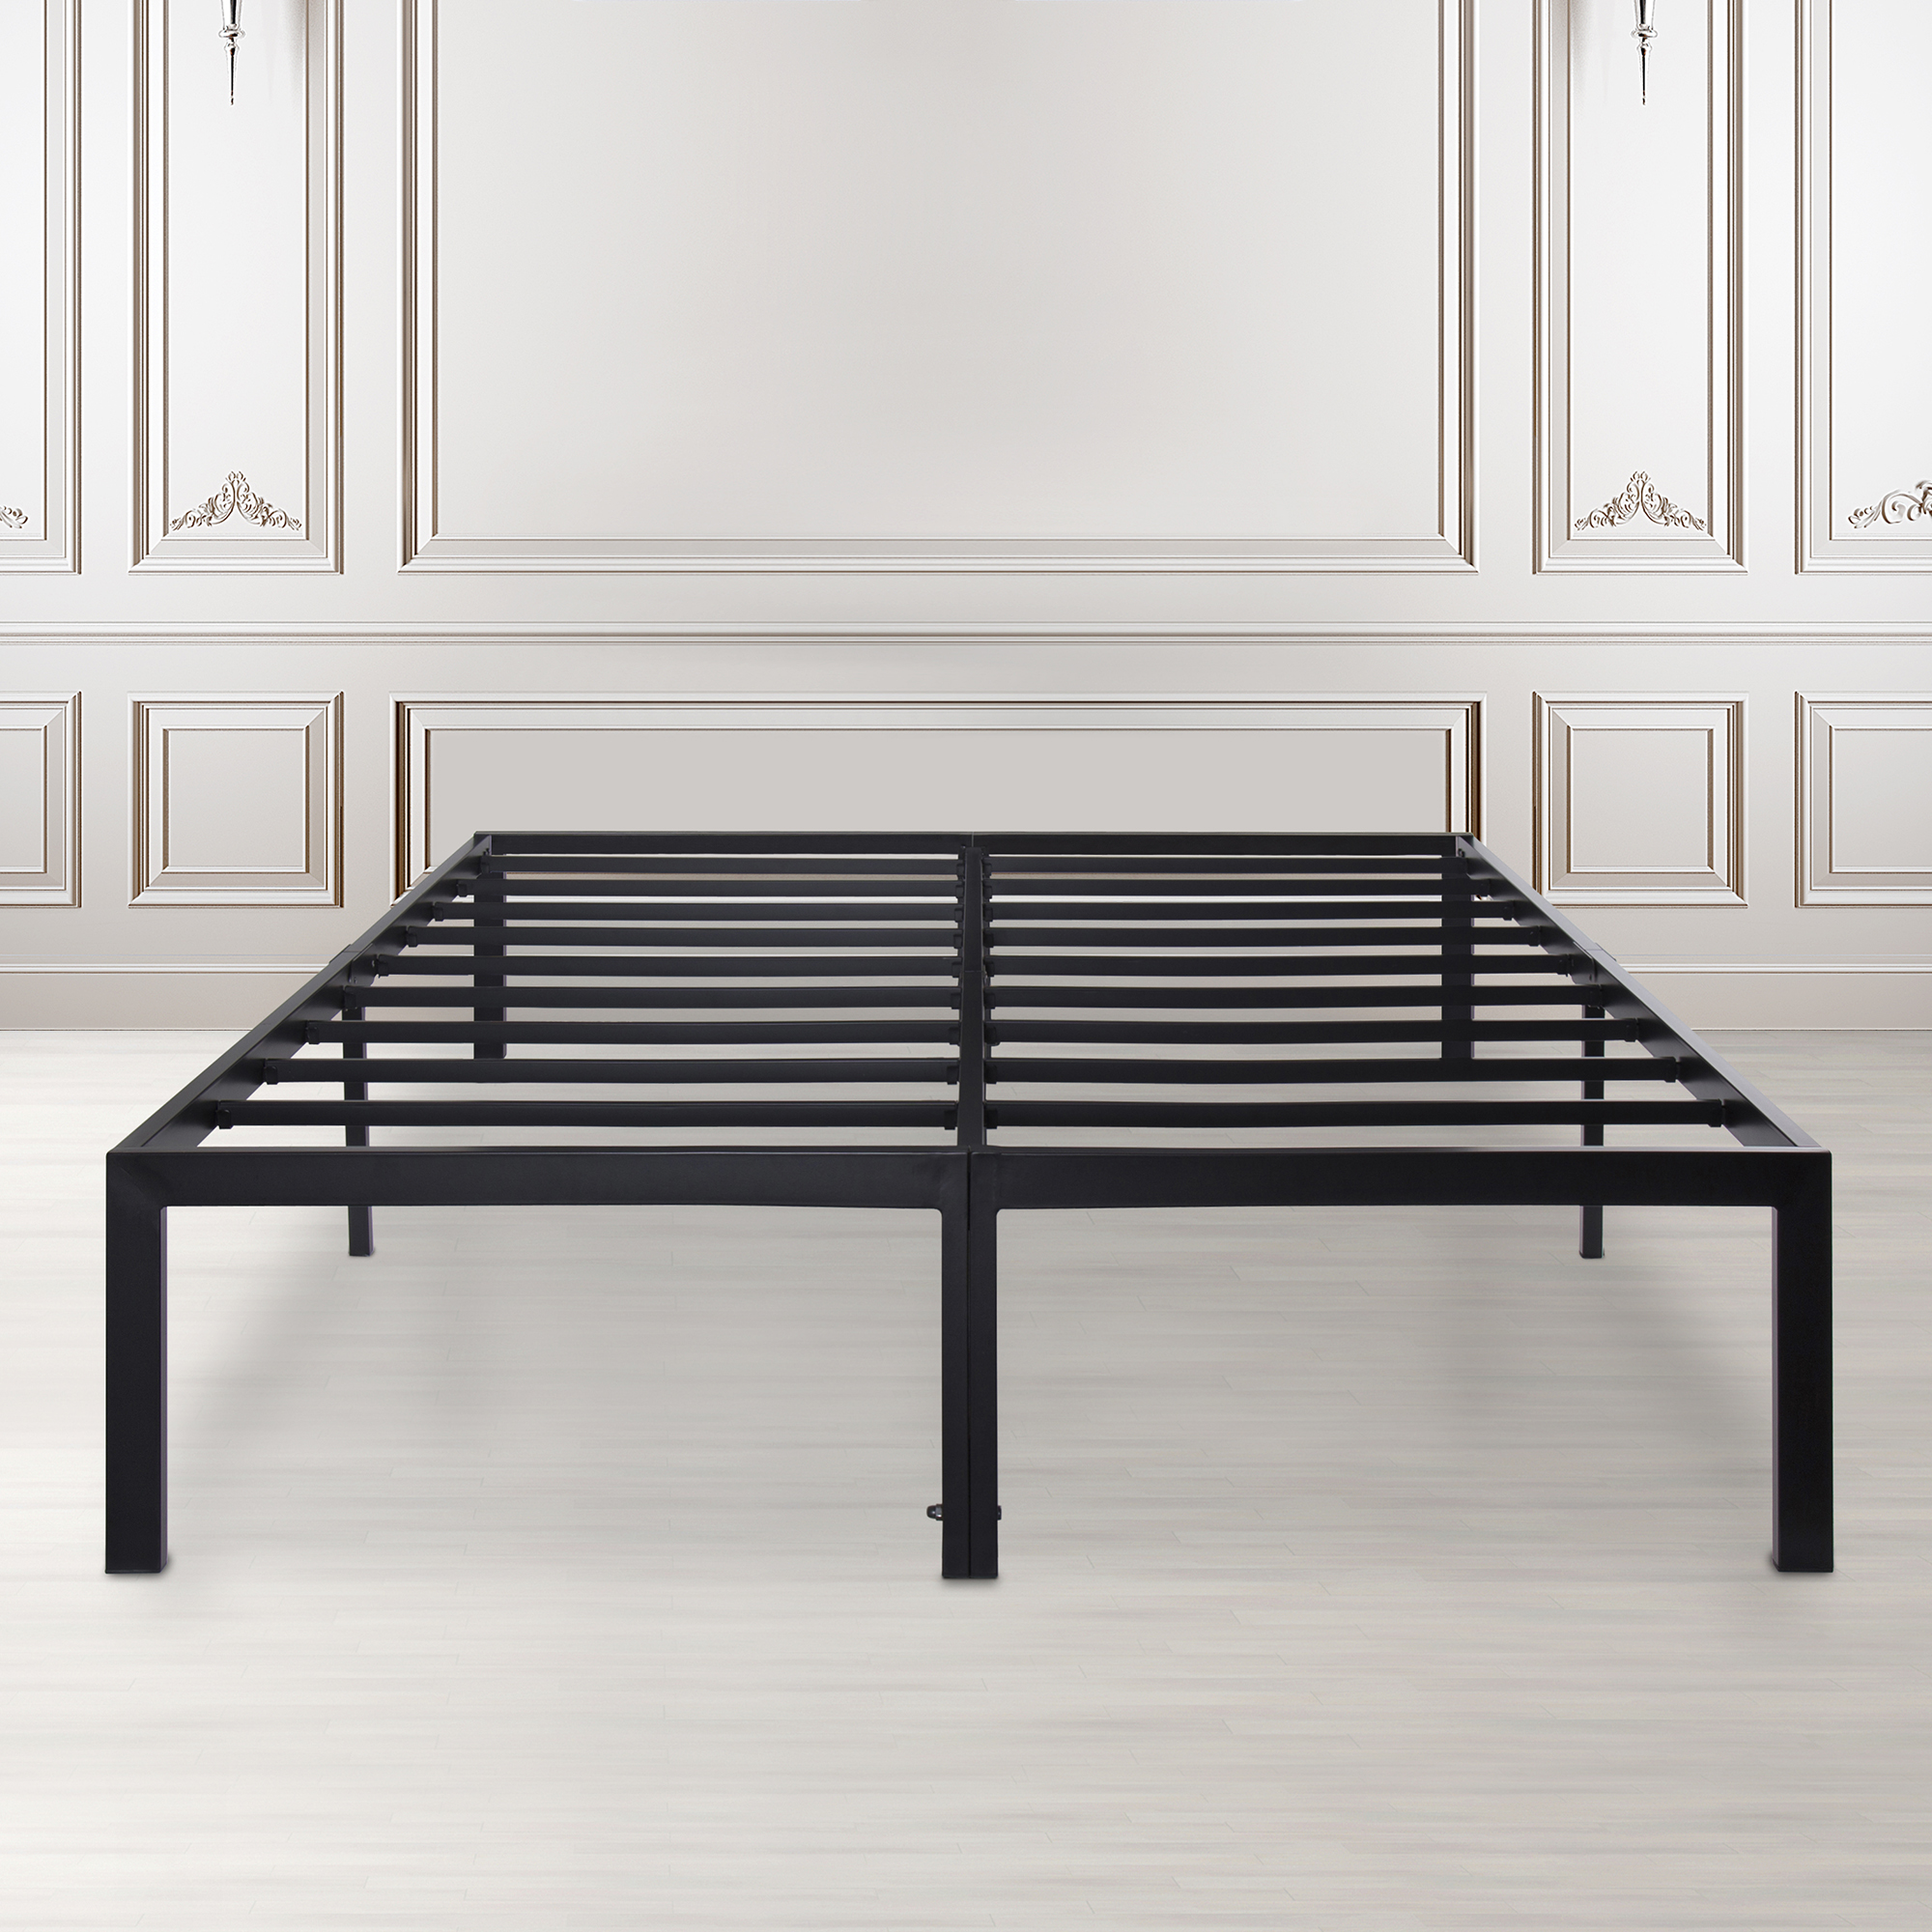 GranRest 14'' Dura Metal Bed Frame with Non-Slip Feature,Queen